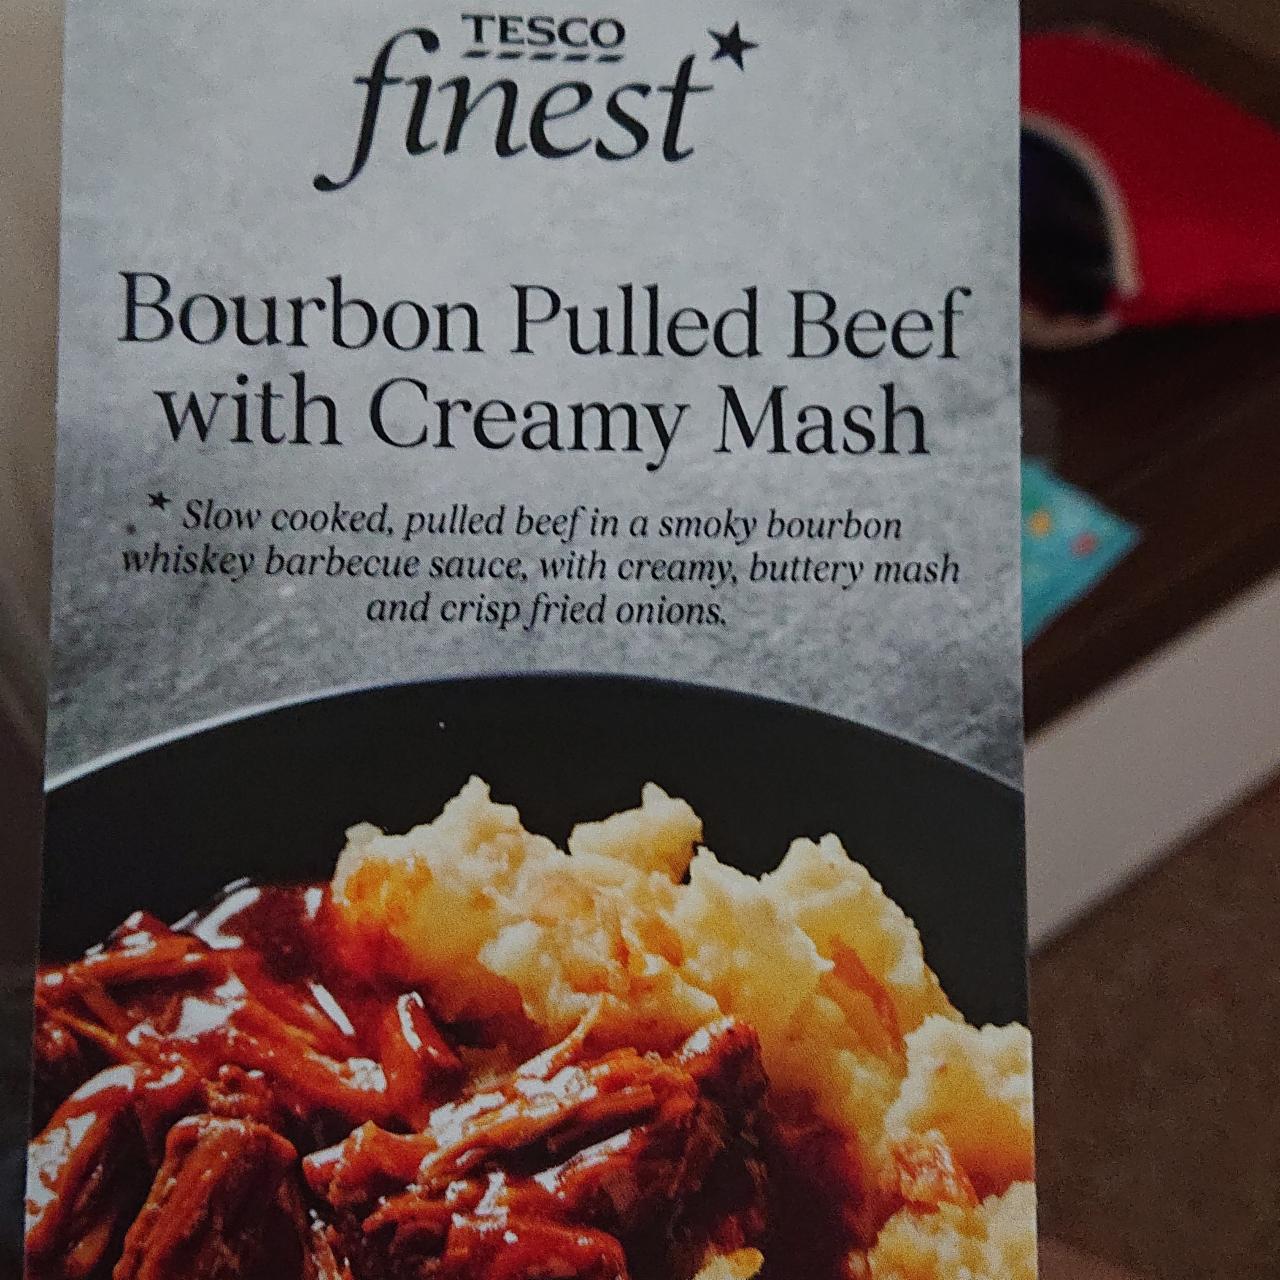 Fotografie - Bourbon Pulled Beef with Creamy Mash Tesco finest